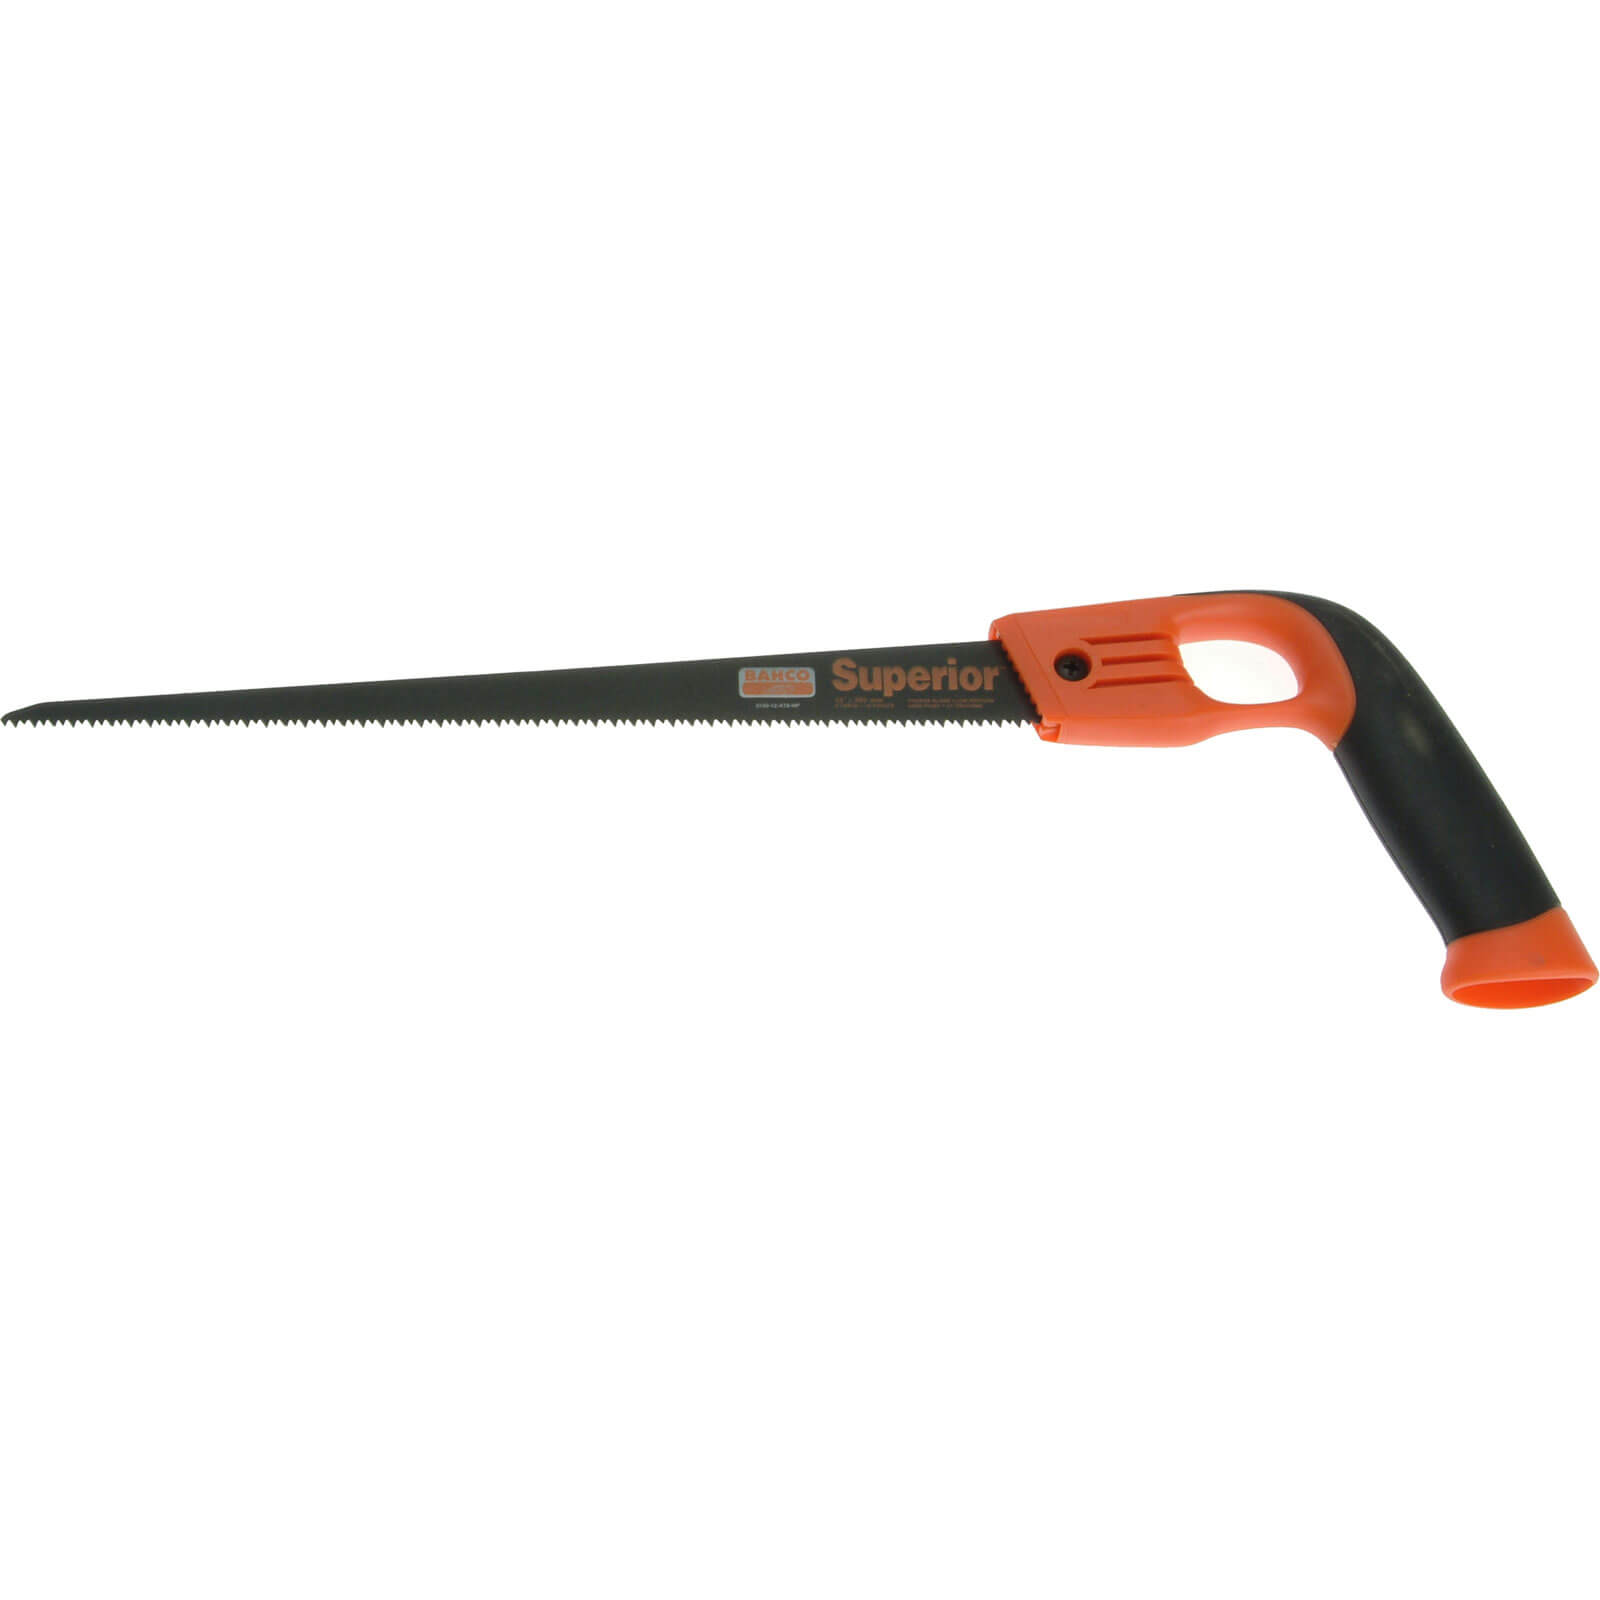 Image of Bahco Compass Hand Saw for Wood and Plastic 12" / 300mm 9tpi